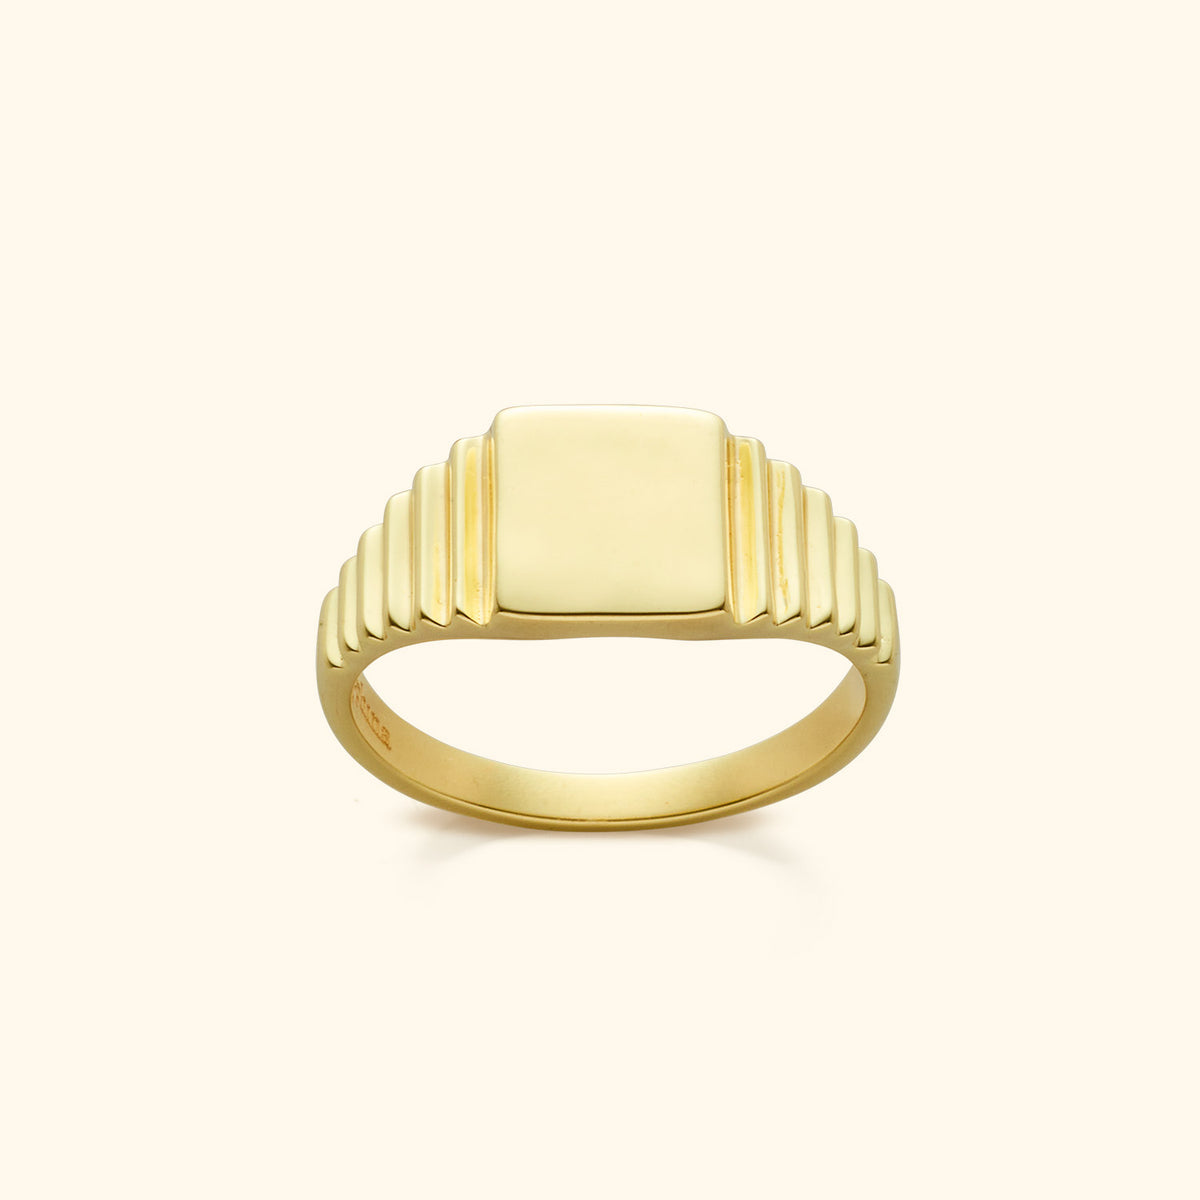 Vintage Engraving Ring | with Initial | Gold colored